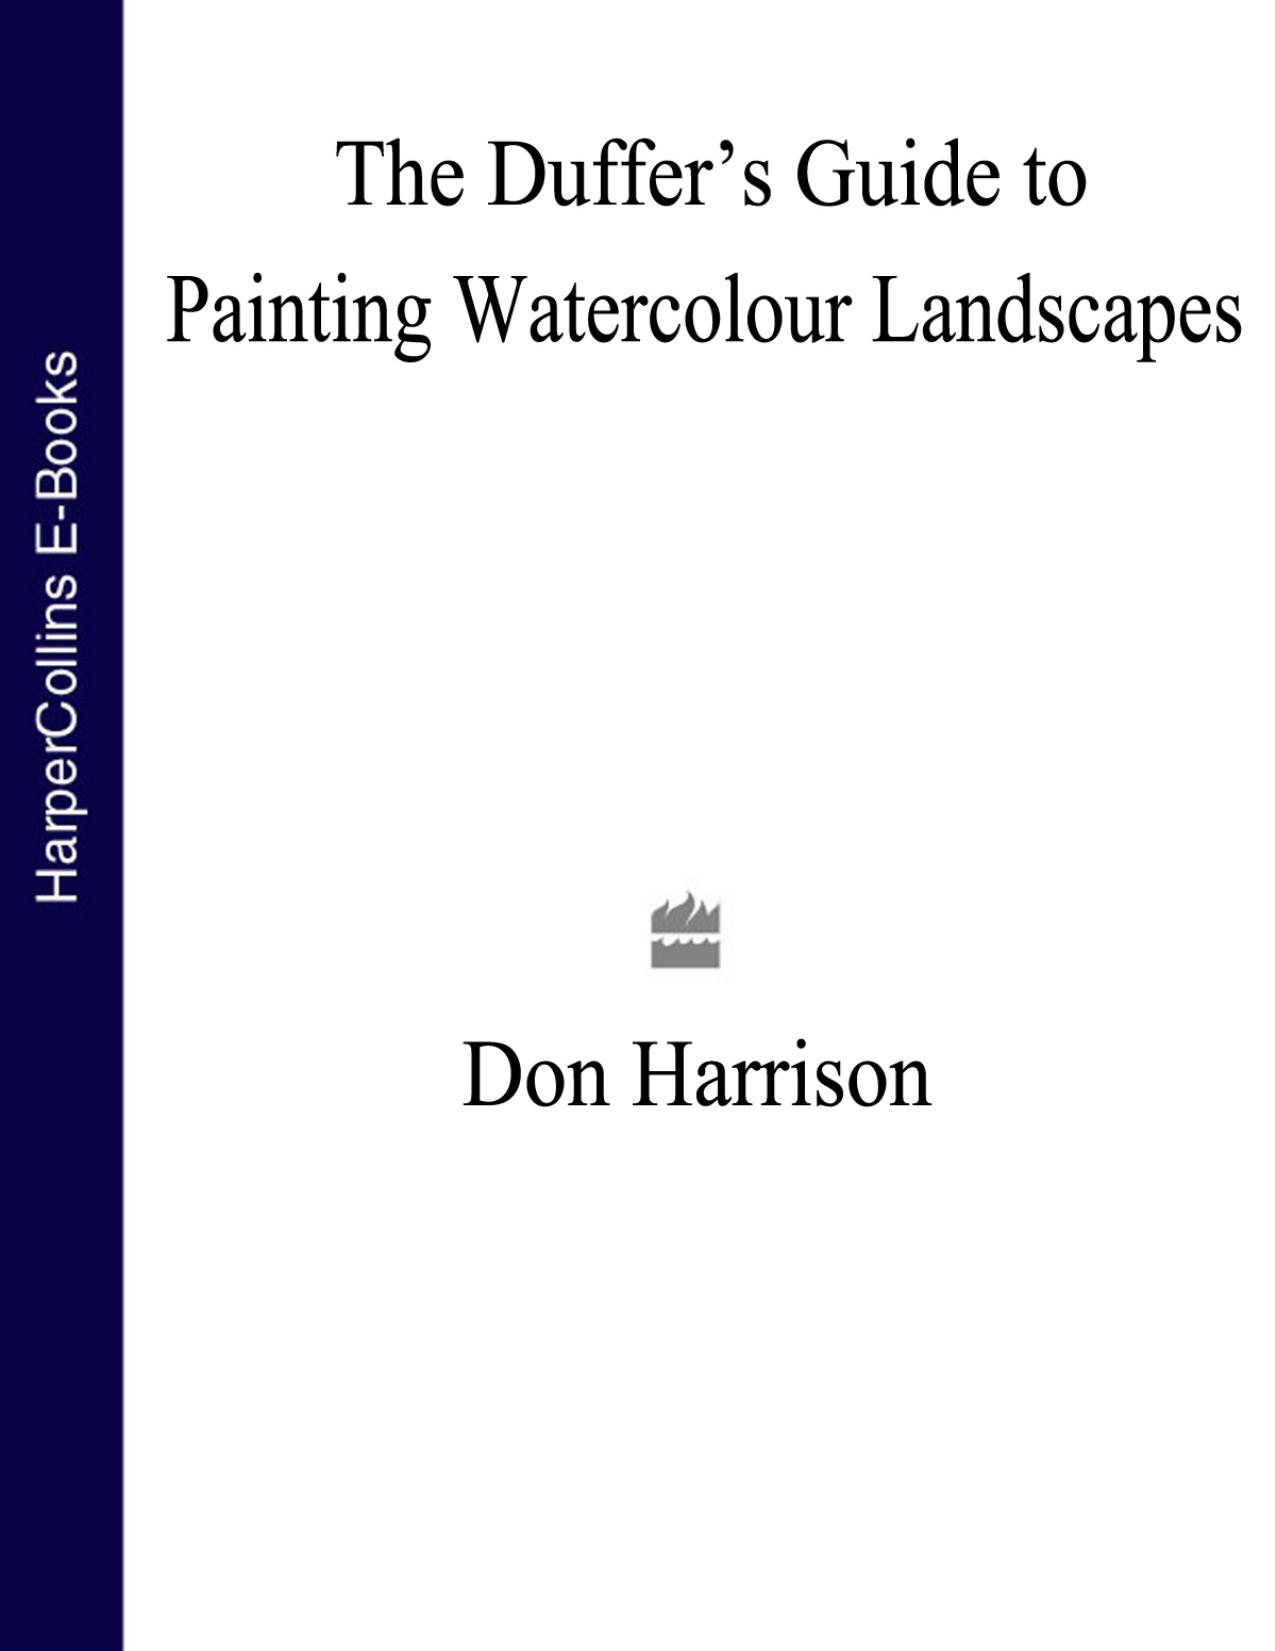 The Duffer's Guide to Painting Watercolour Landscapes by Don Harrison